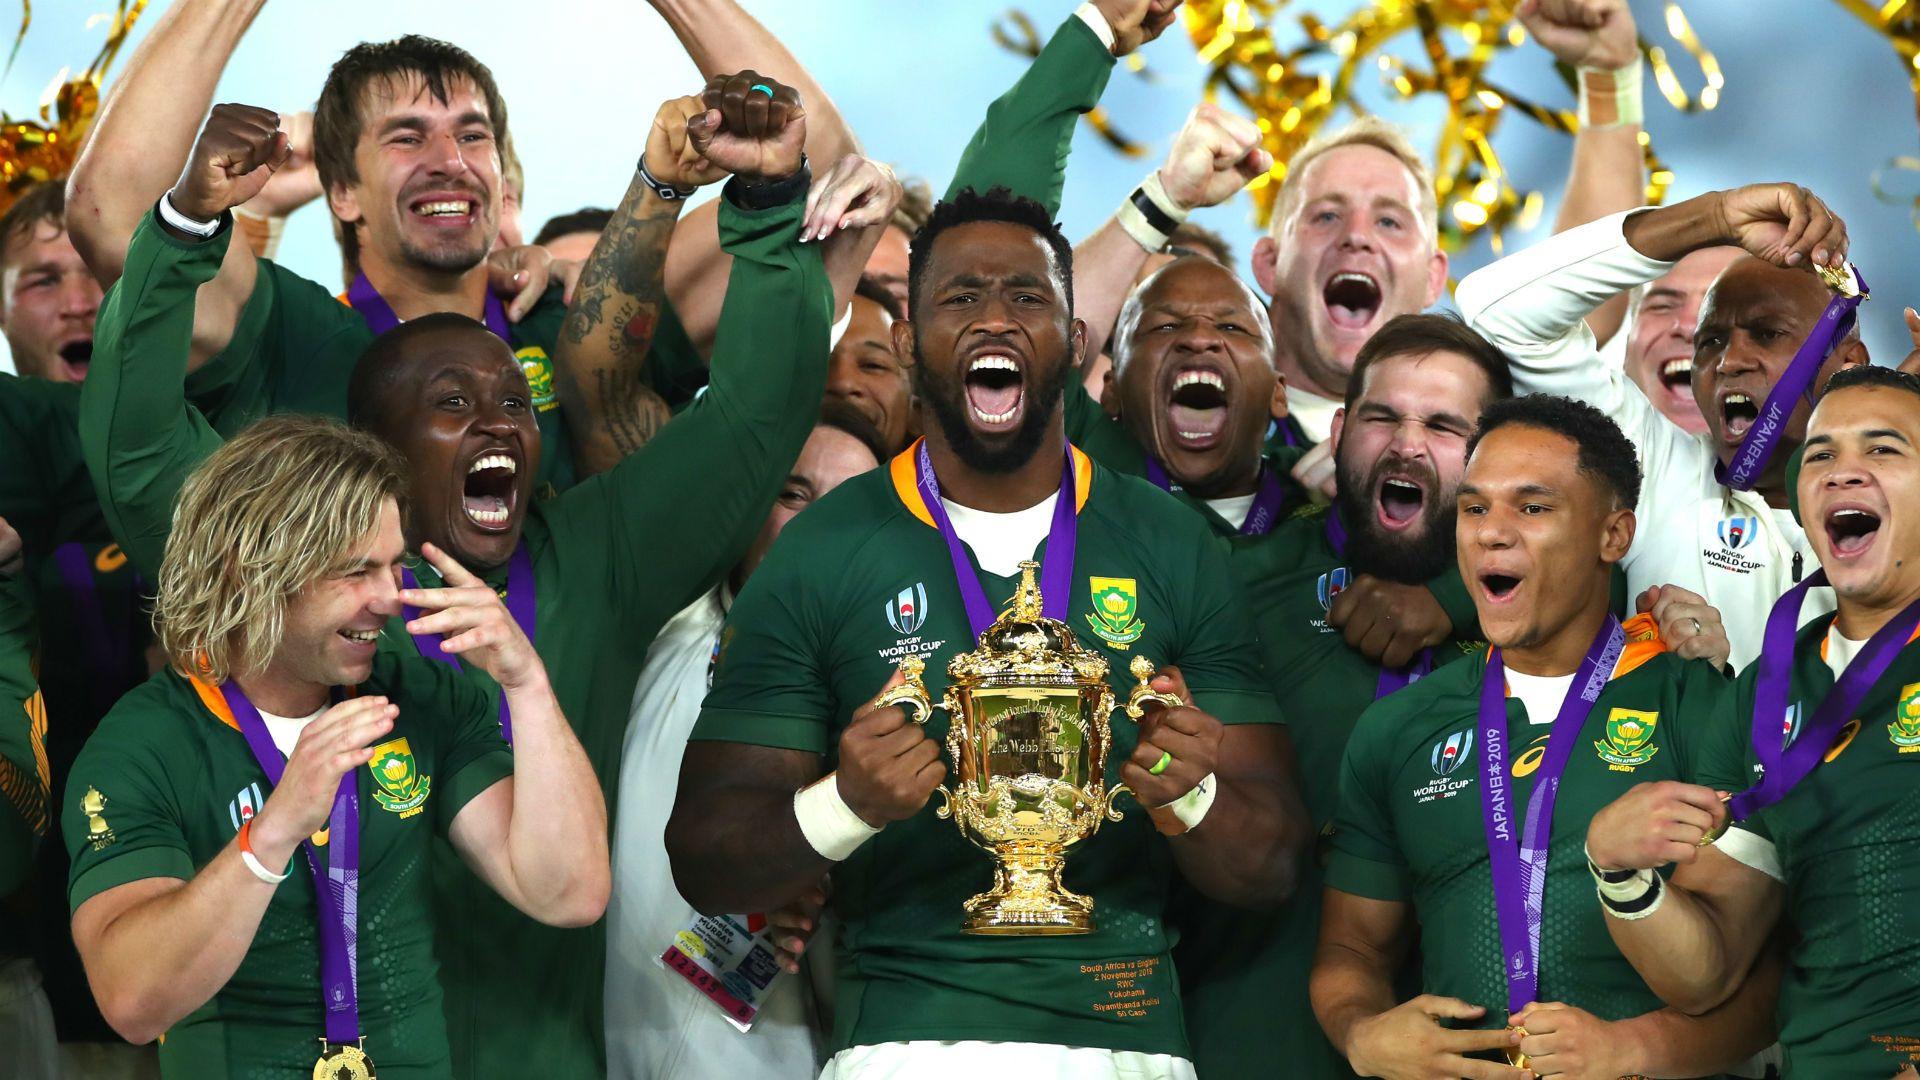 Rugby World Cup 2019: Pollard delight at 'truly historic' South